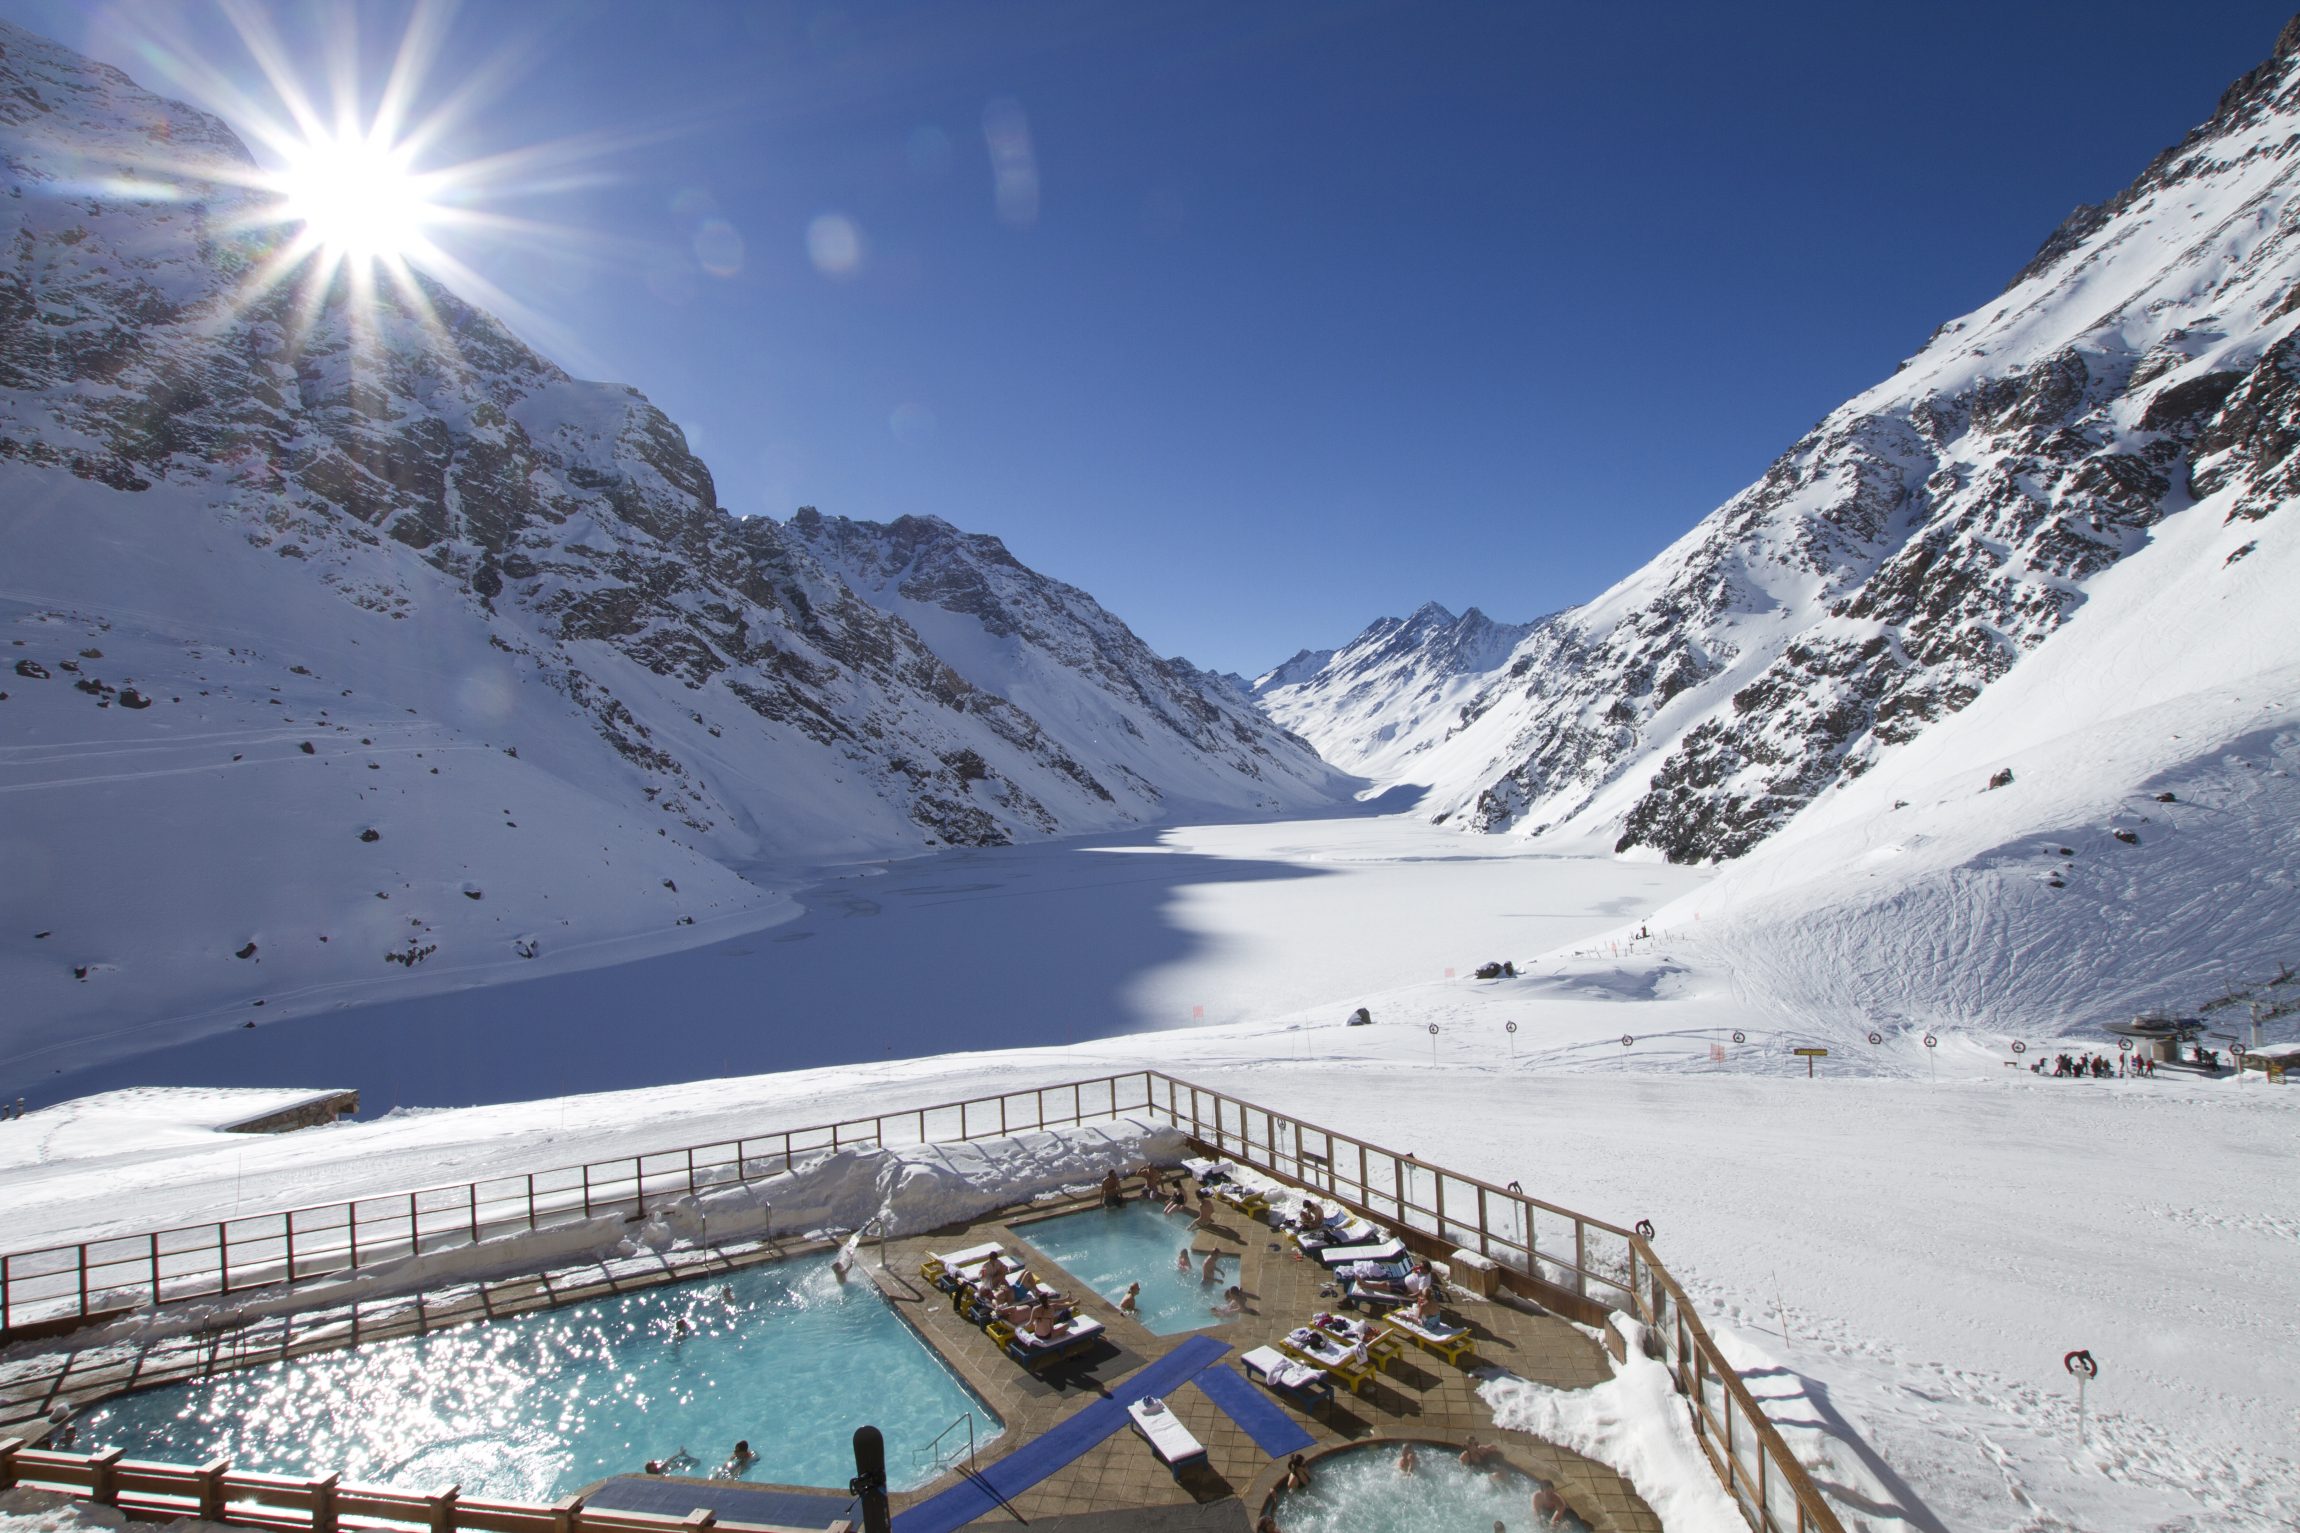 Pool and hot tub with the views of the Three Brothers peaks and the "Laguna del Inca'.